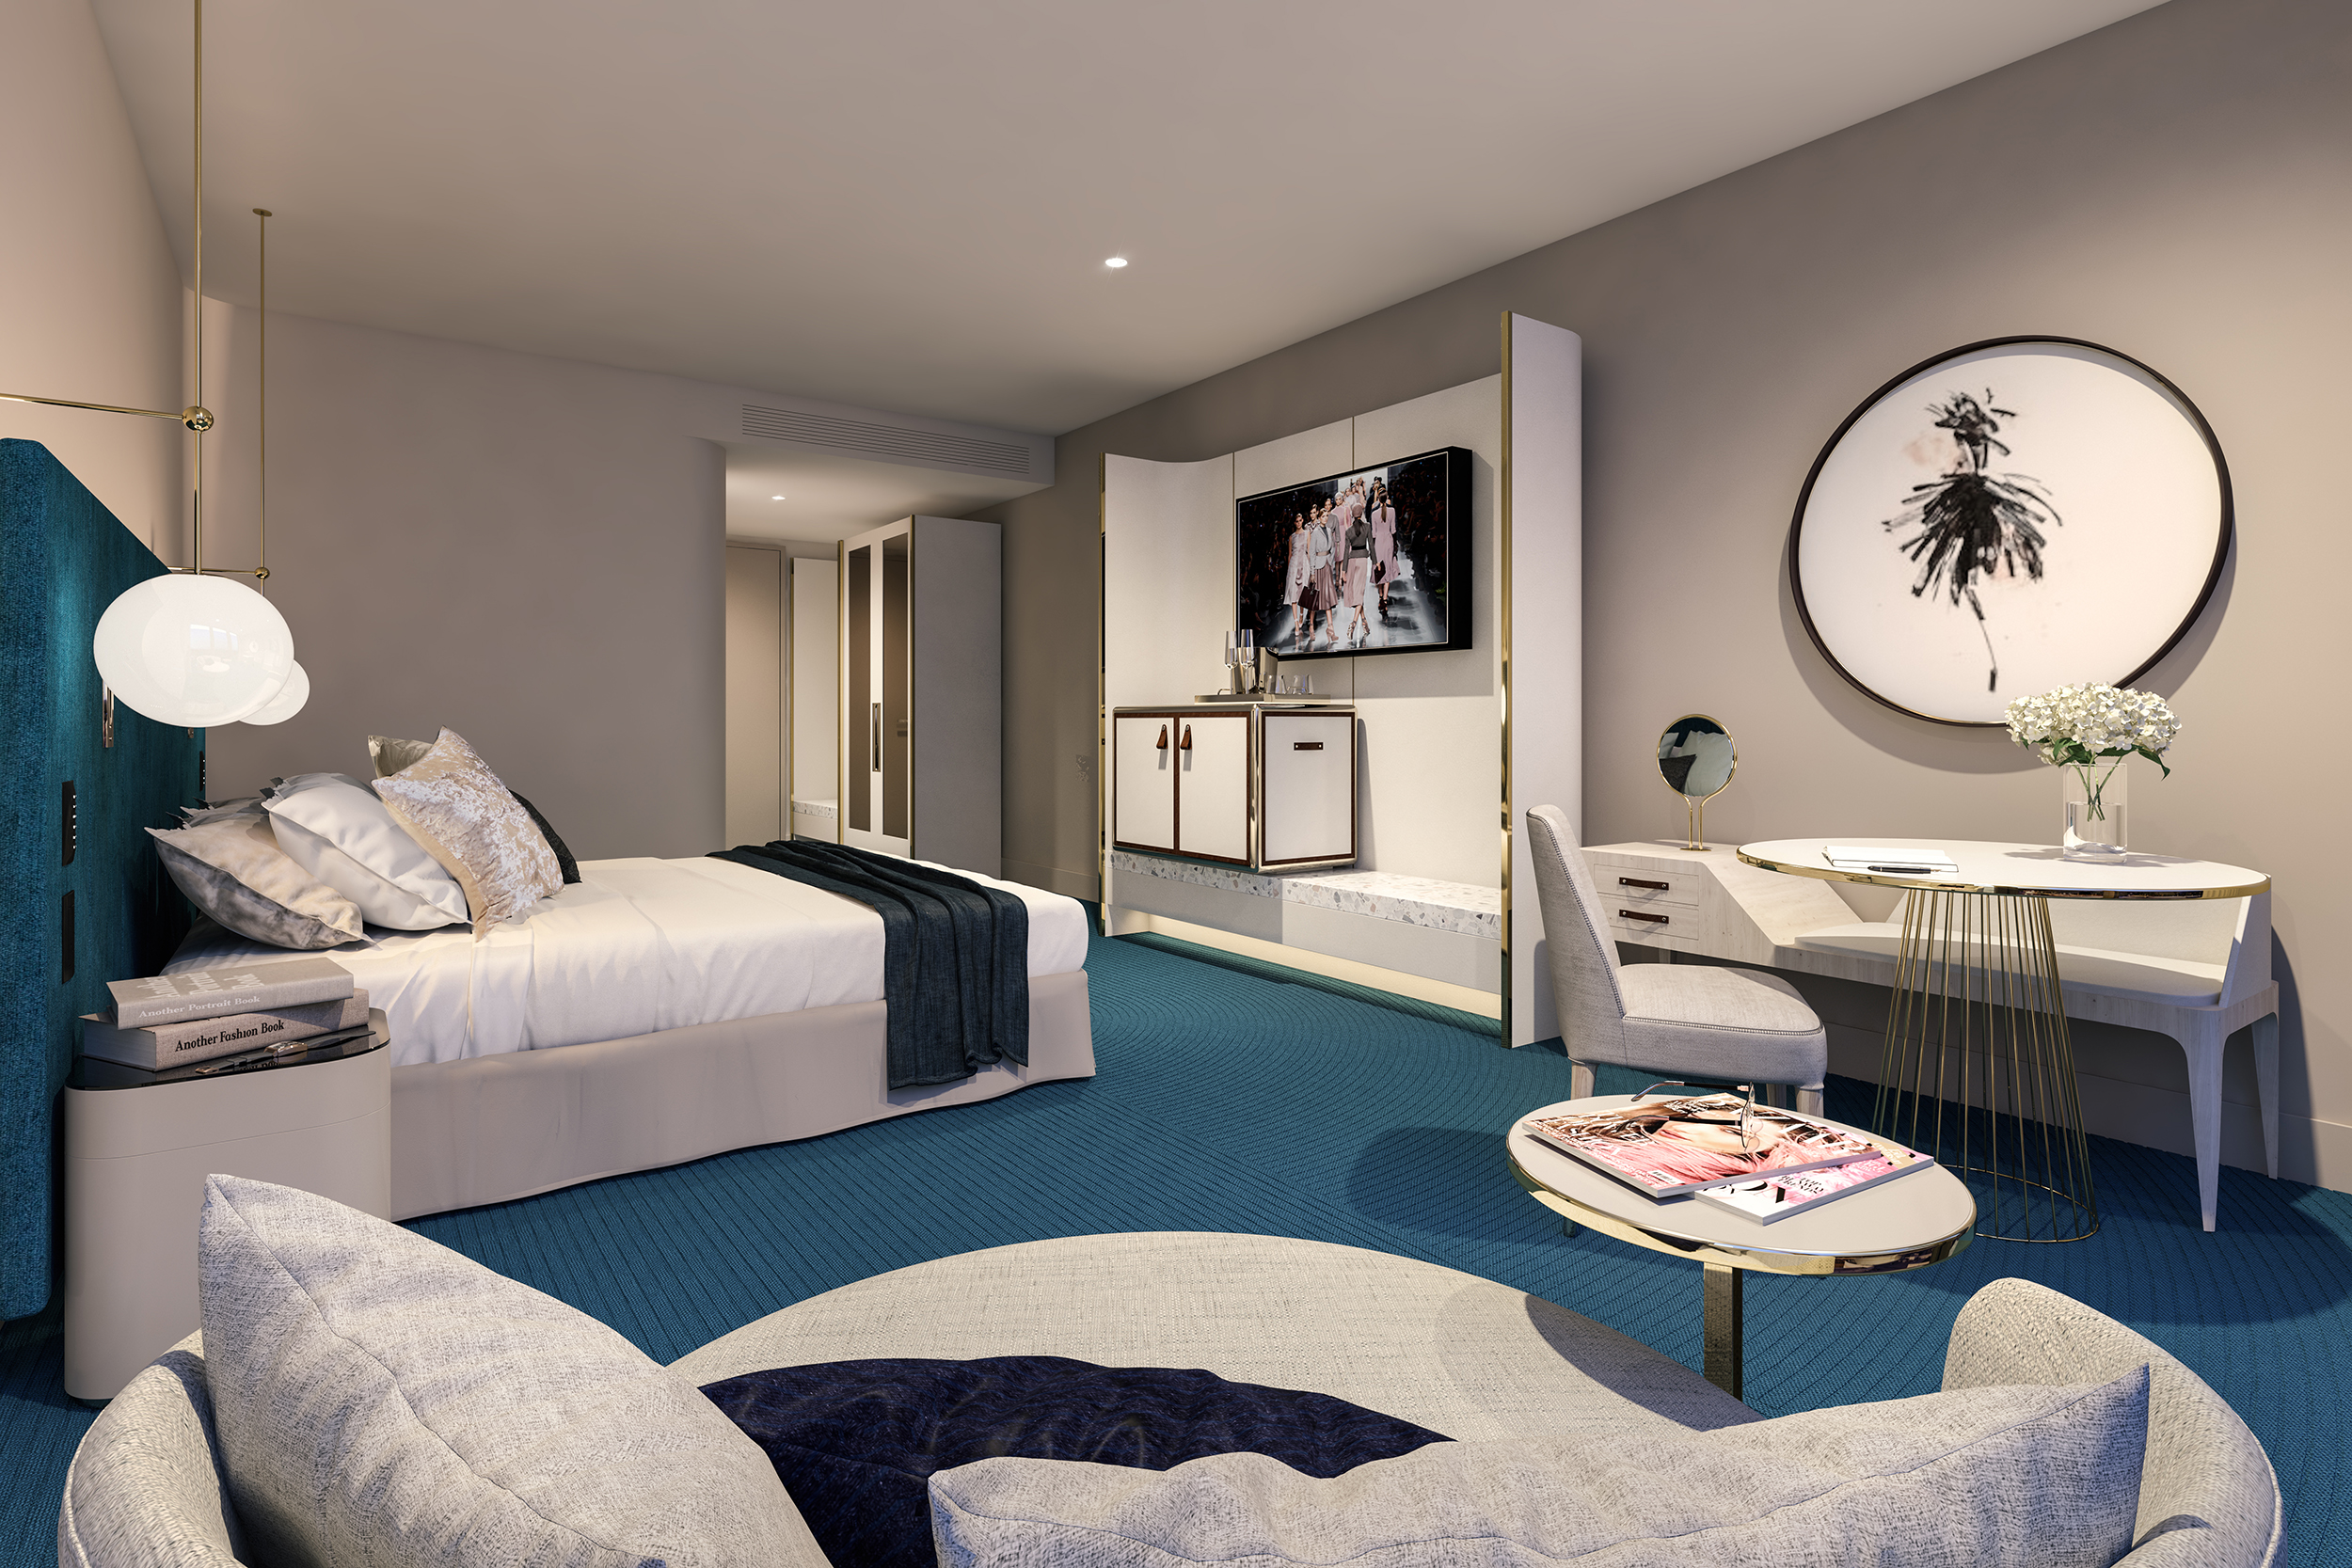 Hotel Chadstone Melbourne - MGallery by Sofitel (Opening November 2019) | 1341 Dandenong Road, Chadstone, Victoria 3148 | +61 3 9567 1073